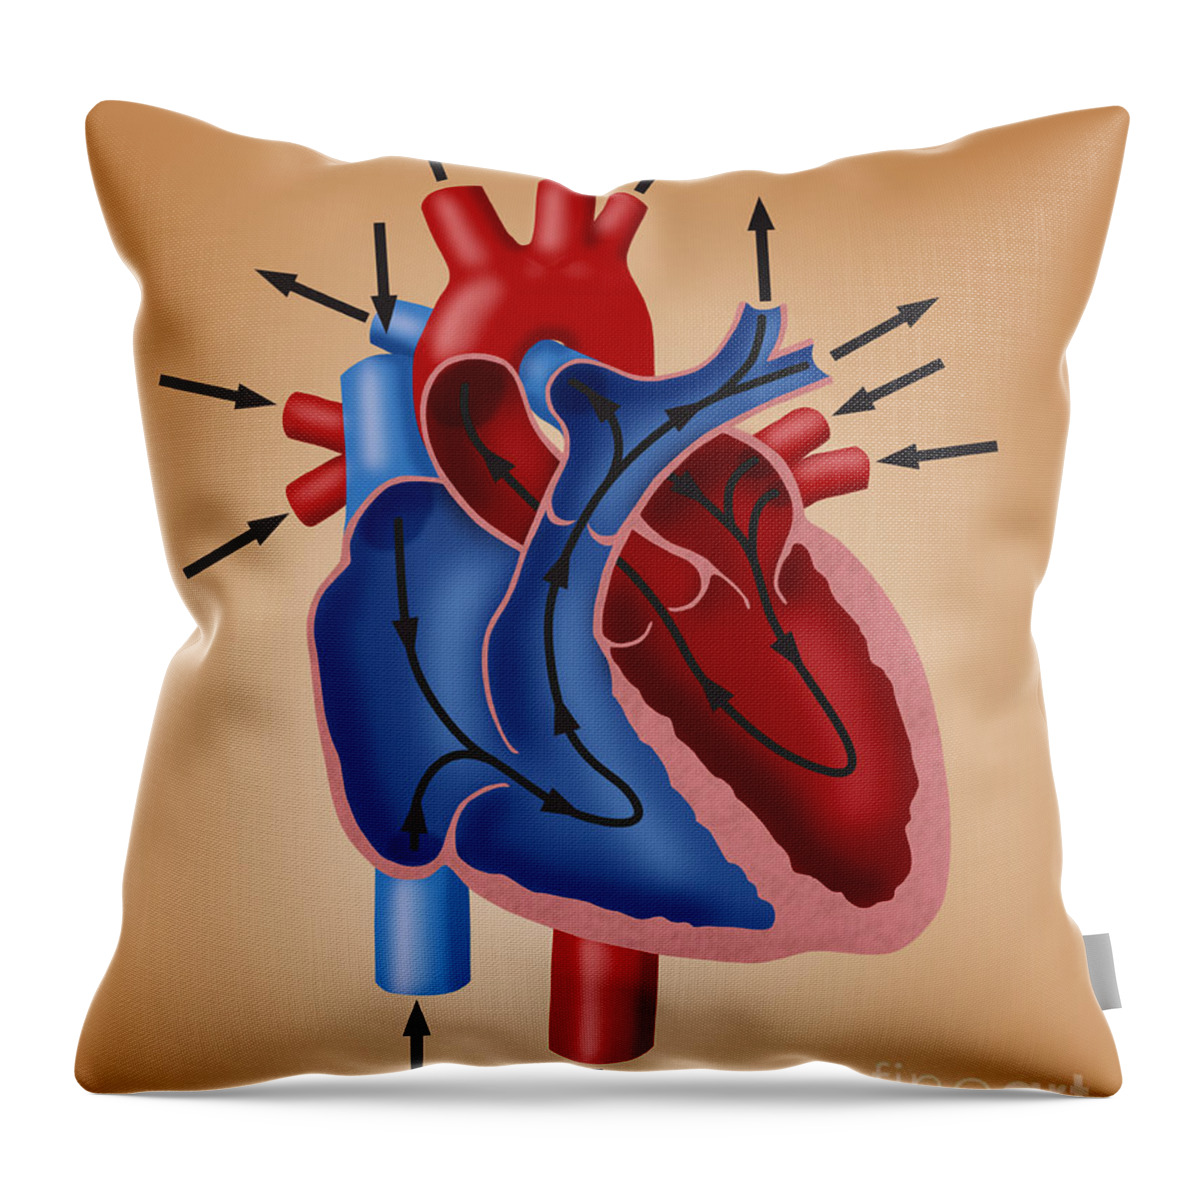 Anatomy Throw Pillow featuring the photograph Blood Flow Diagram #1 by Monica Schroeder / Science Source